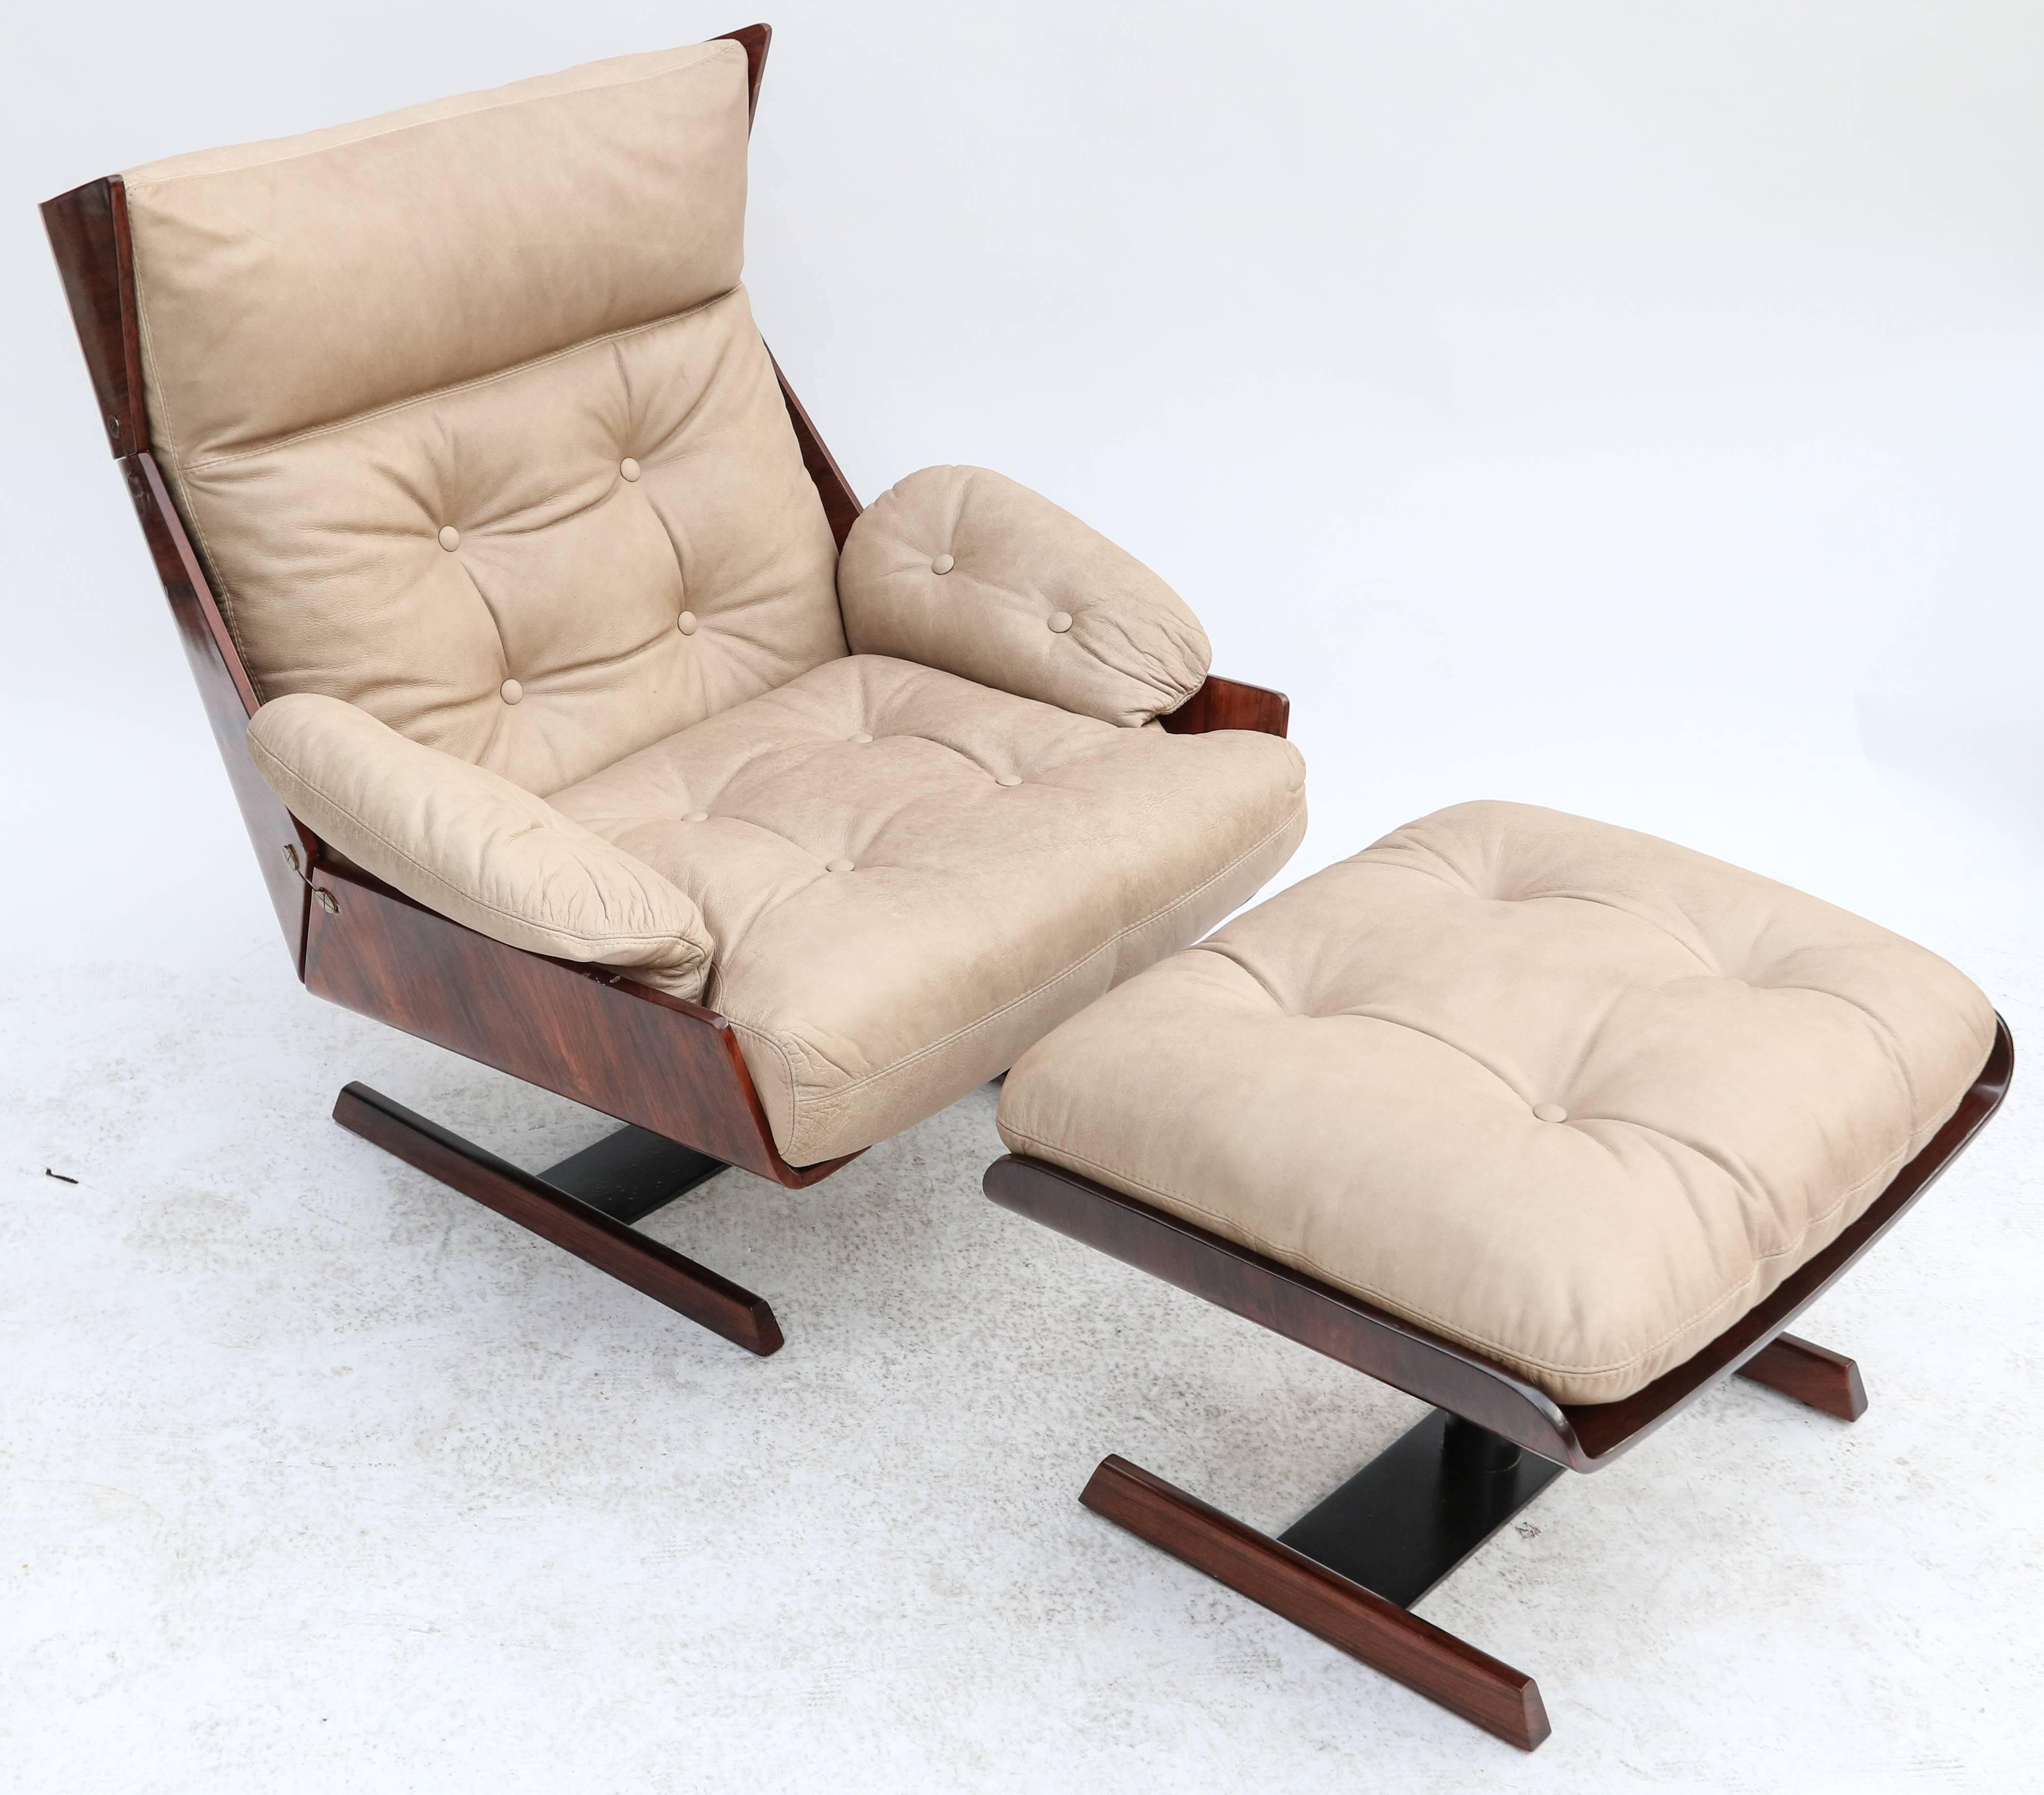 Pair of Novo Rumo, 1960s Brazilian jacaranda lounge chairs and ottomans upholstered in beige leather.

Ottoman measures: 20.5